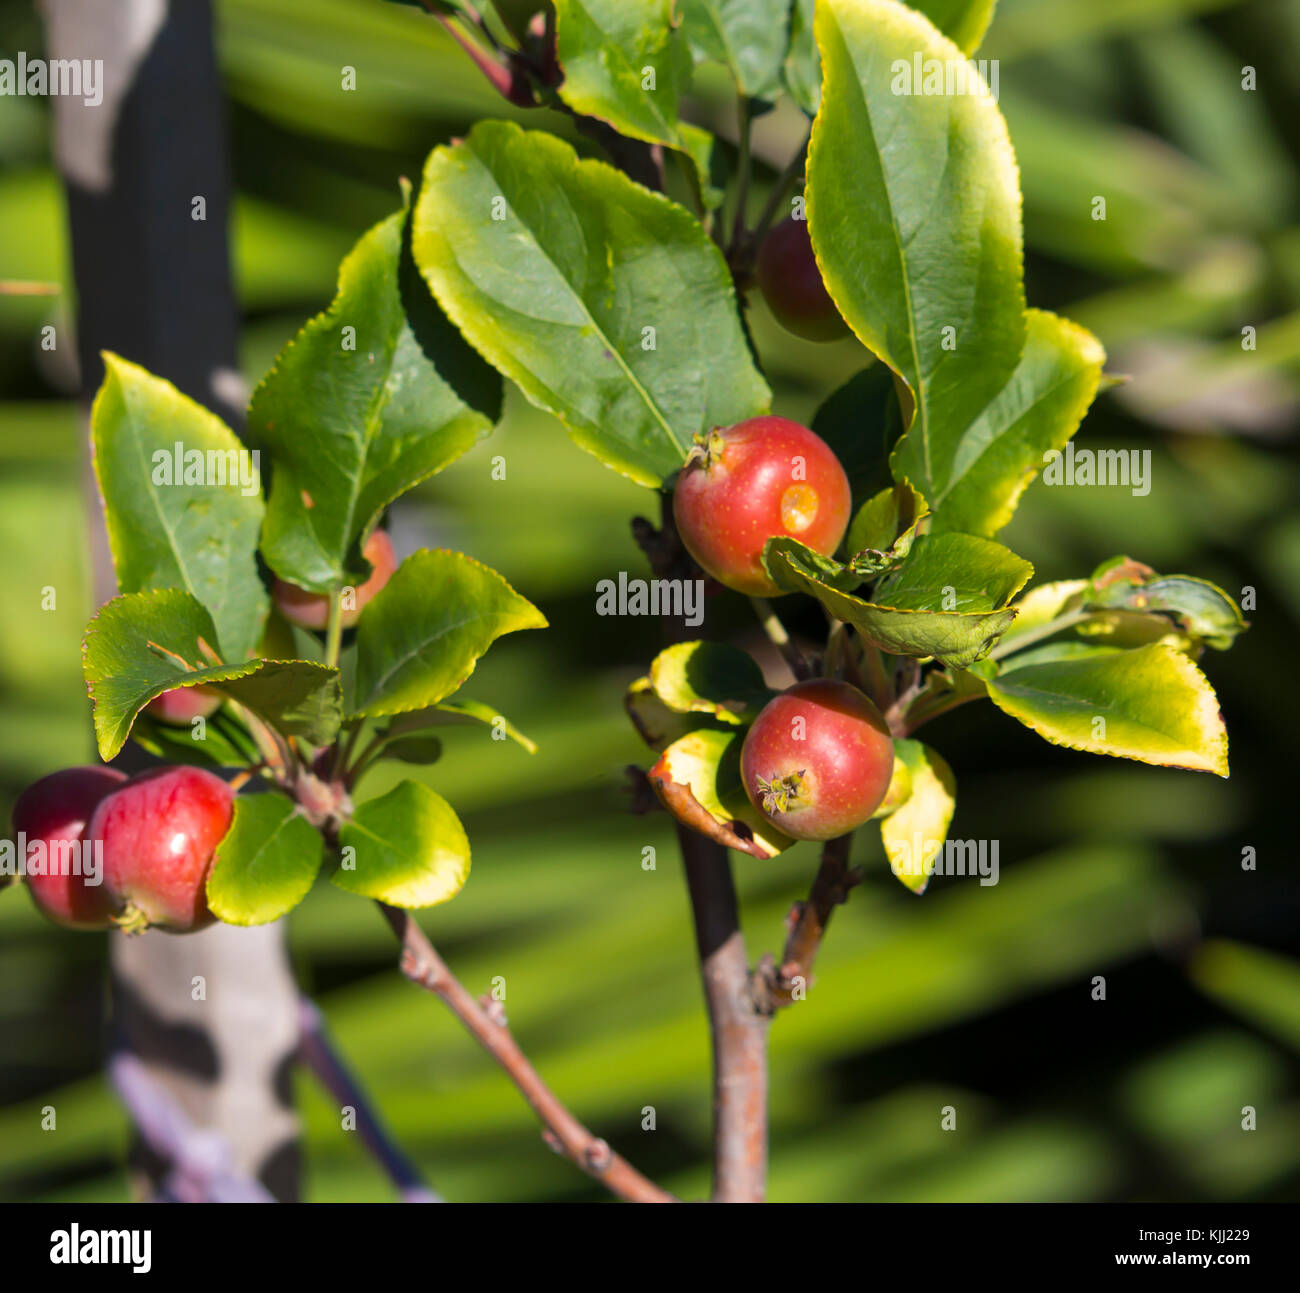 Malus  a genus of 30 to 55 species of small deciduous apple trees or shrubs in the family Rosaceae,  wild crabapple being a  tree  with red fruit. Stock Photo